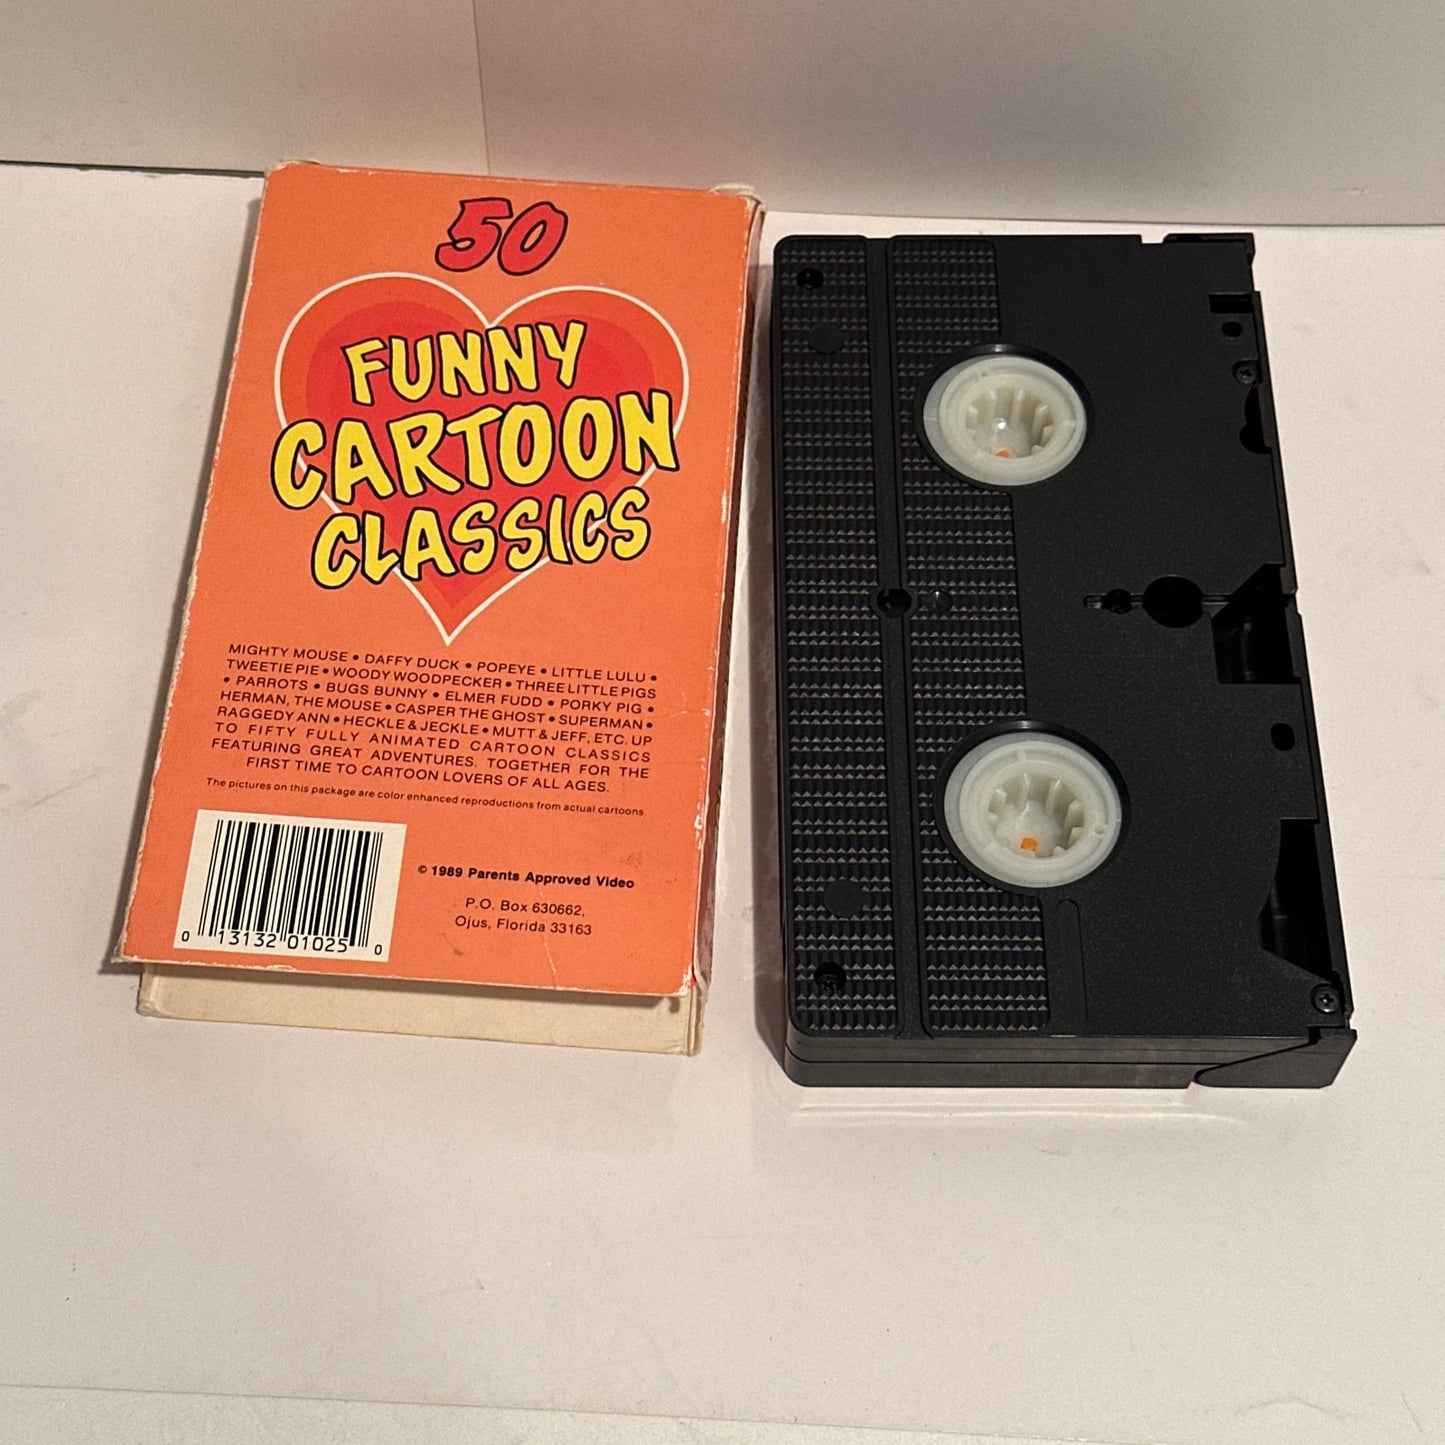 Funny Cartoon Classics VHS - Relive the Laughter